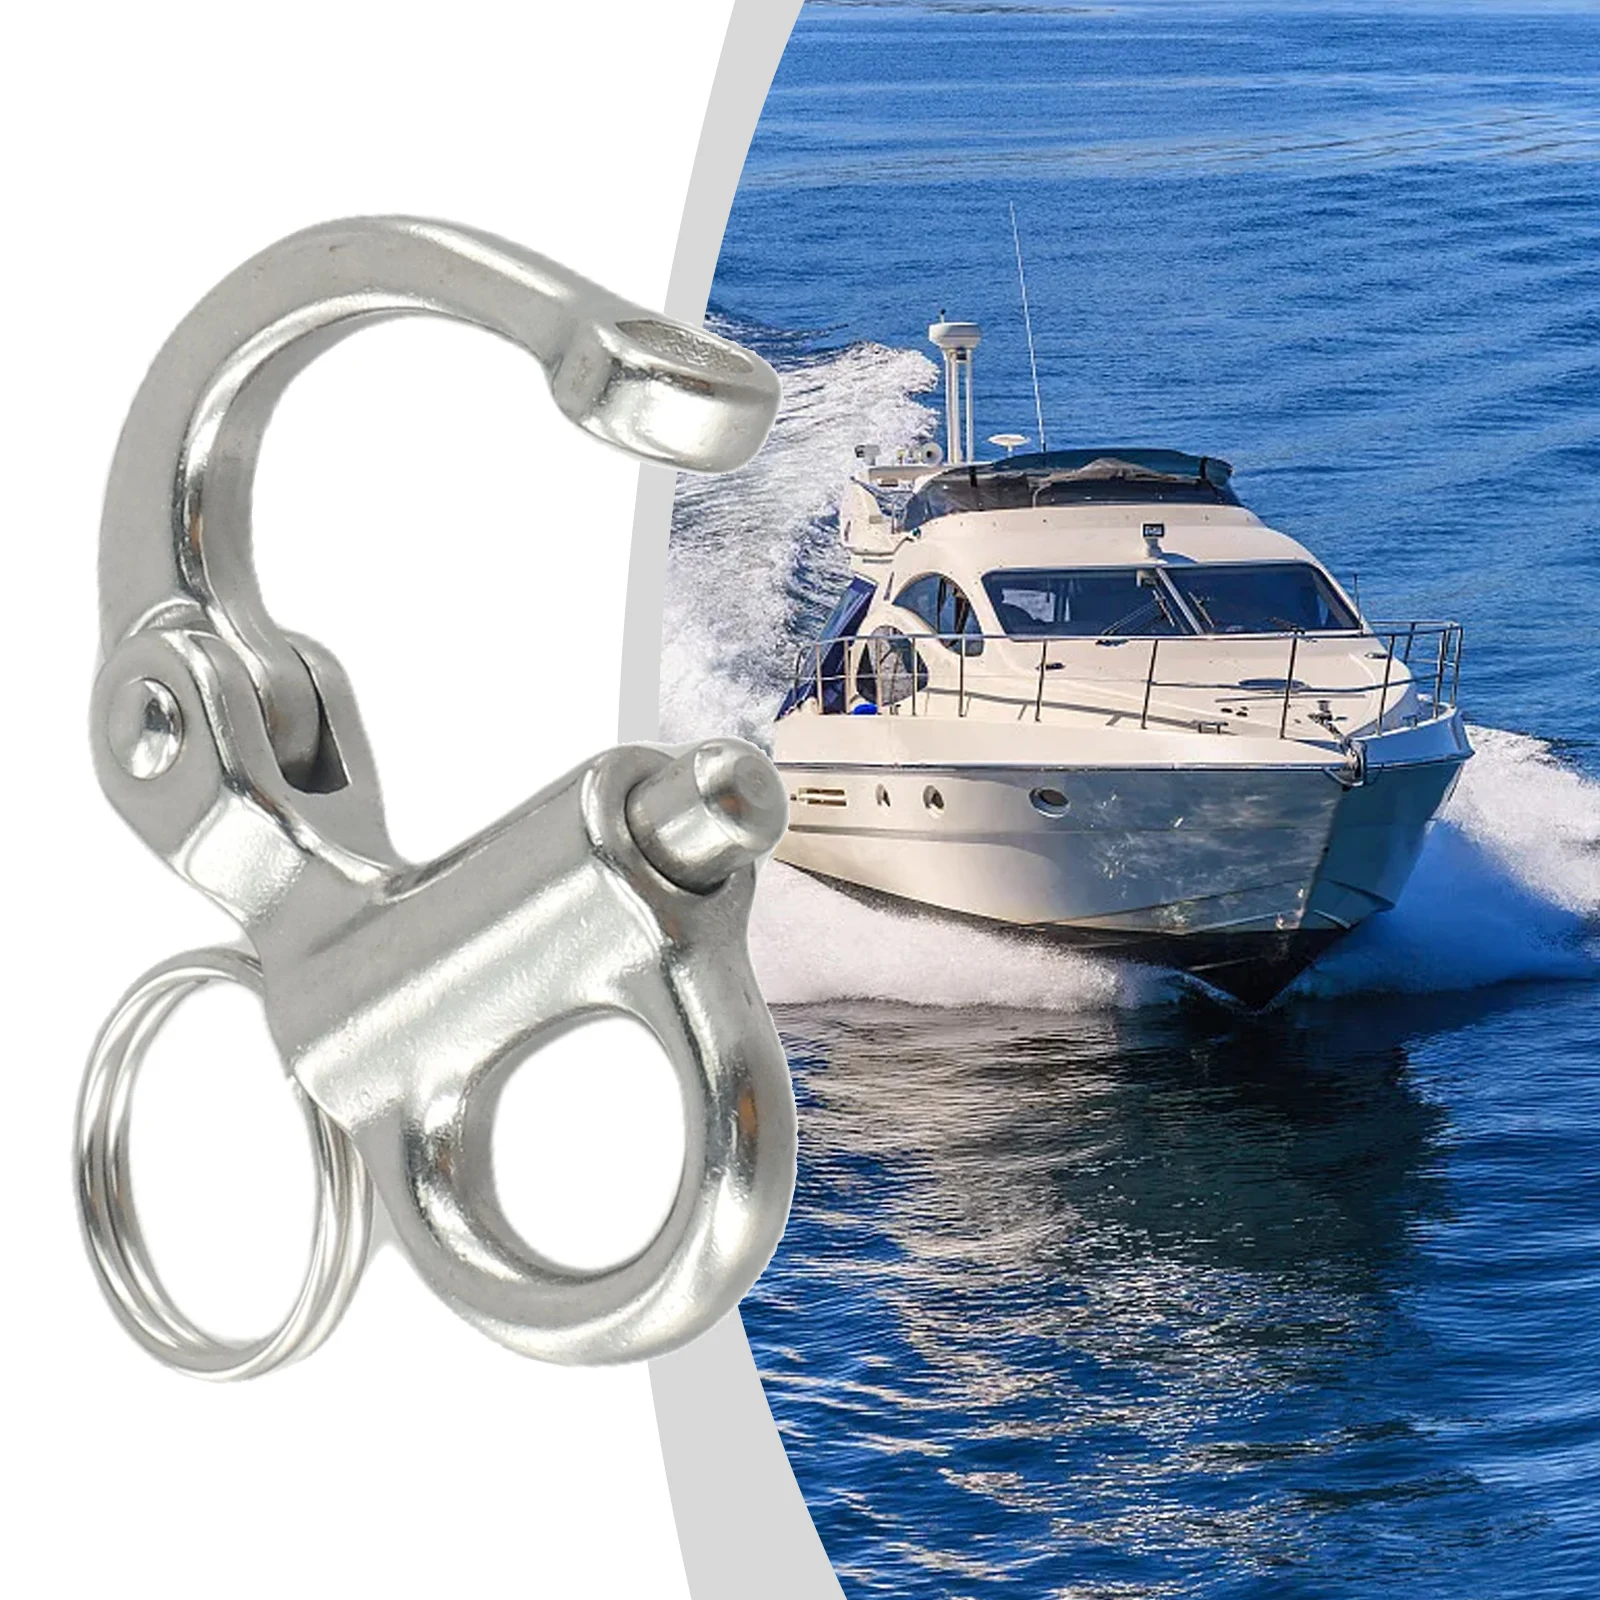 Parts Shackle Eye Fittings Hook Marine Quick Release Replacement Snap Stainless Steel Swivel Accessories Brand New